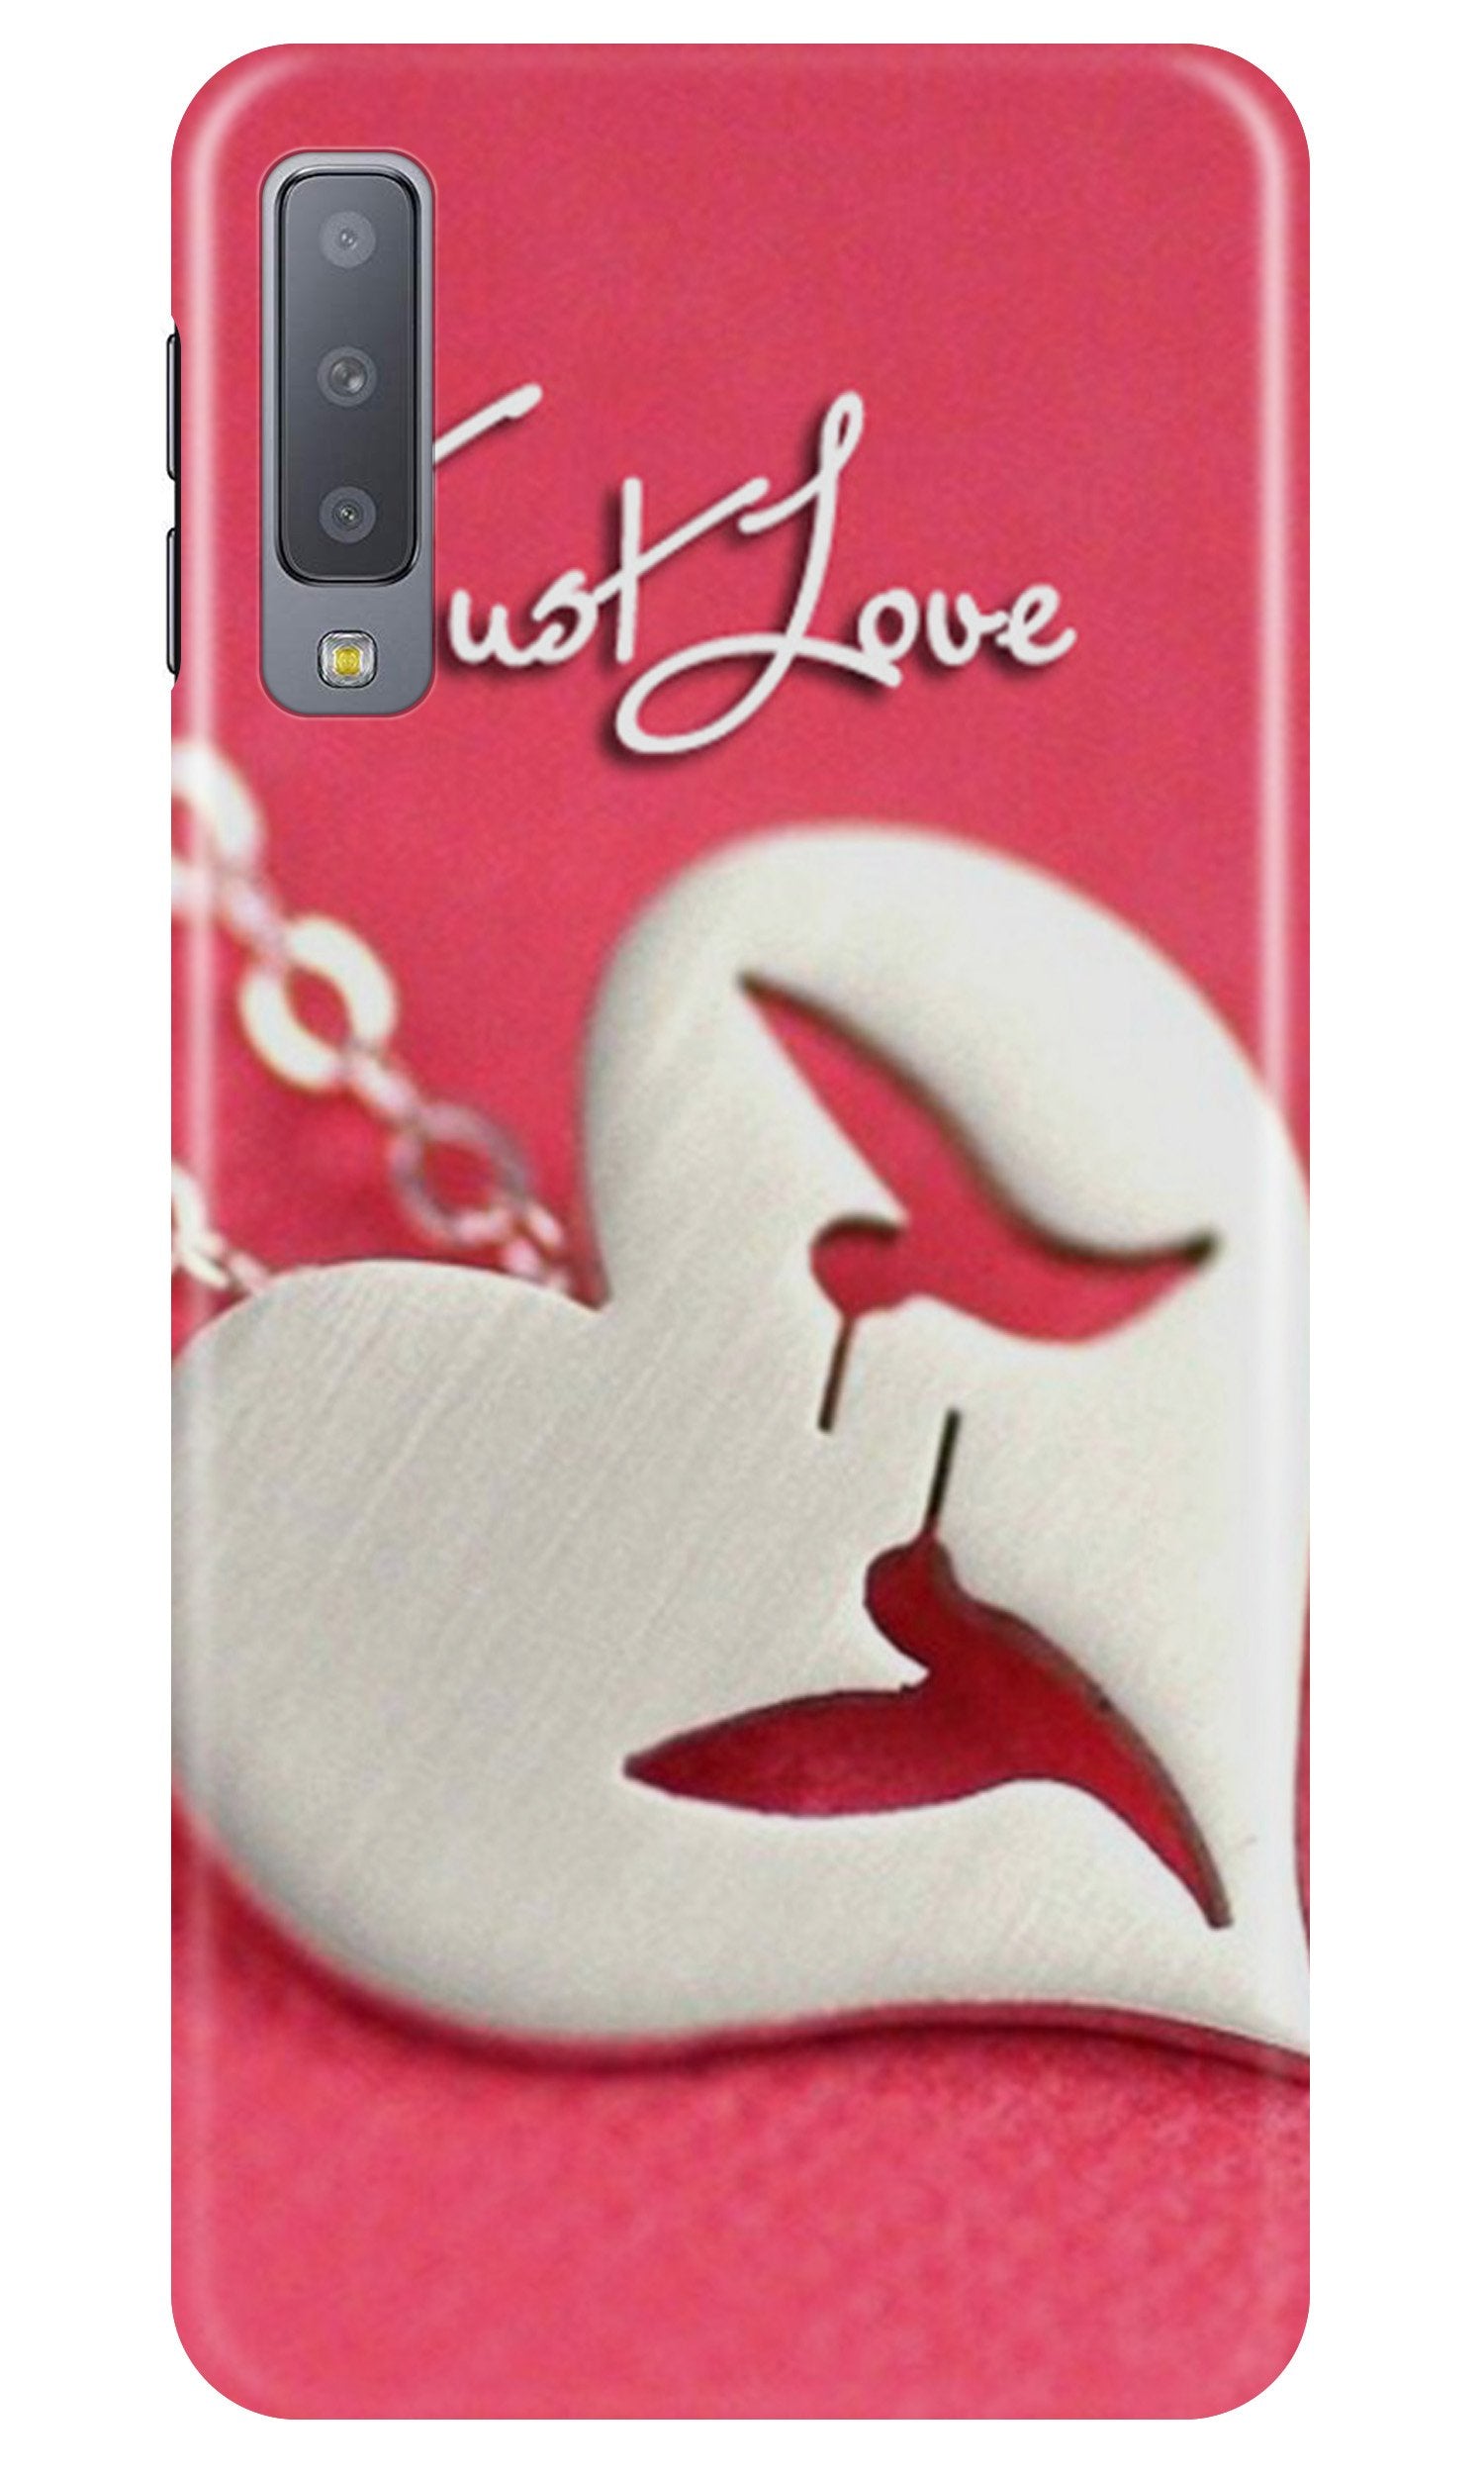 Just love Case for Samsung Galaxy A70